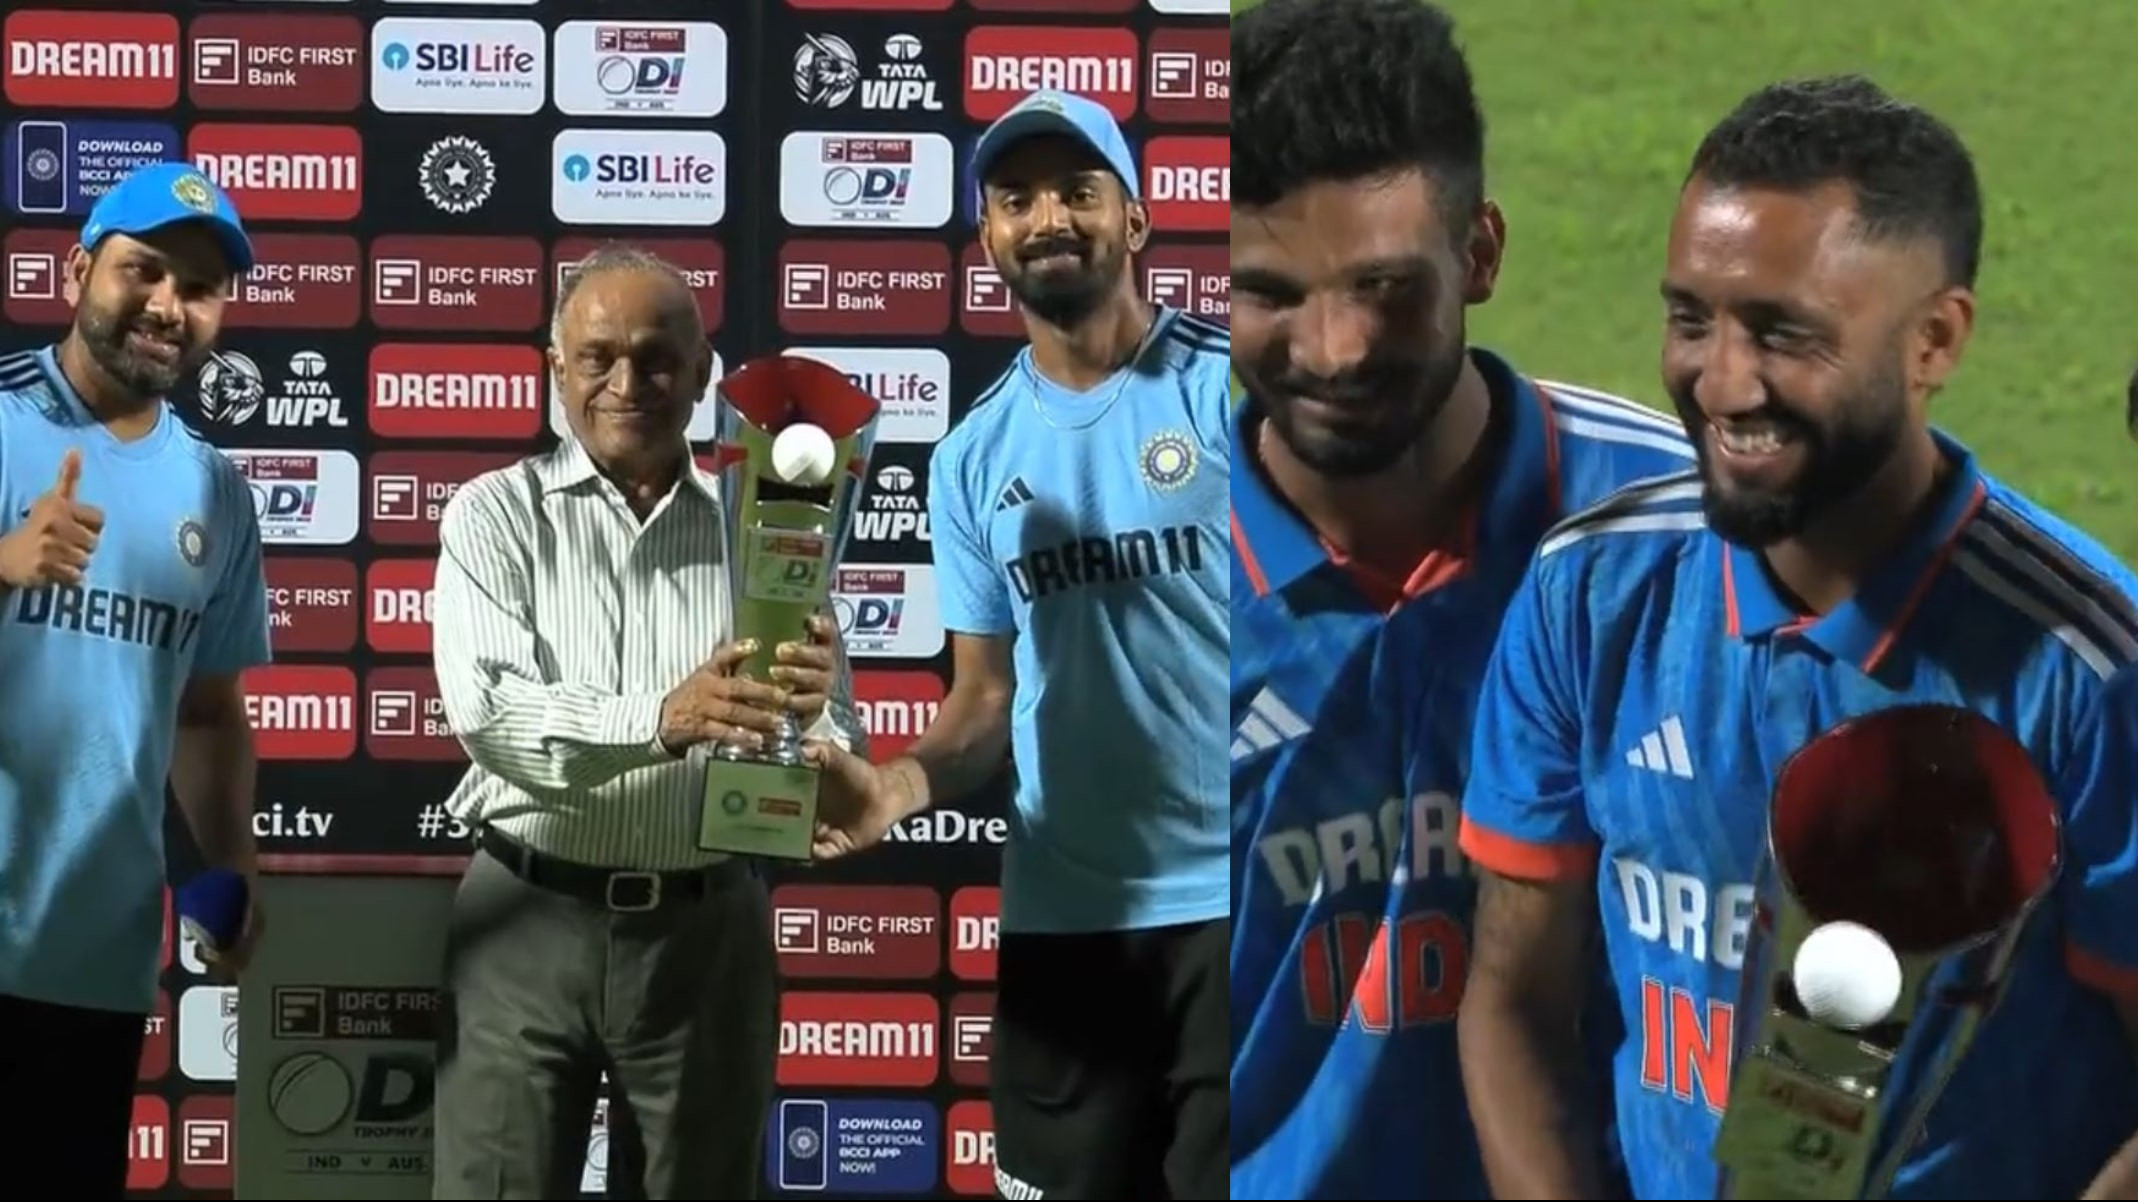 IND v AUS 2023: WATCH- Rohit Sharma calls KL Rahul to collect trophy; Rahul hands it over to Saurashtra players for photos